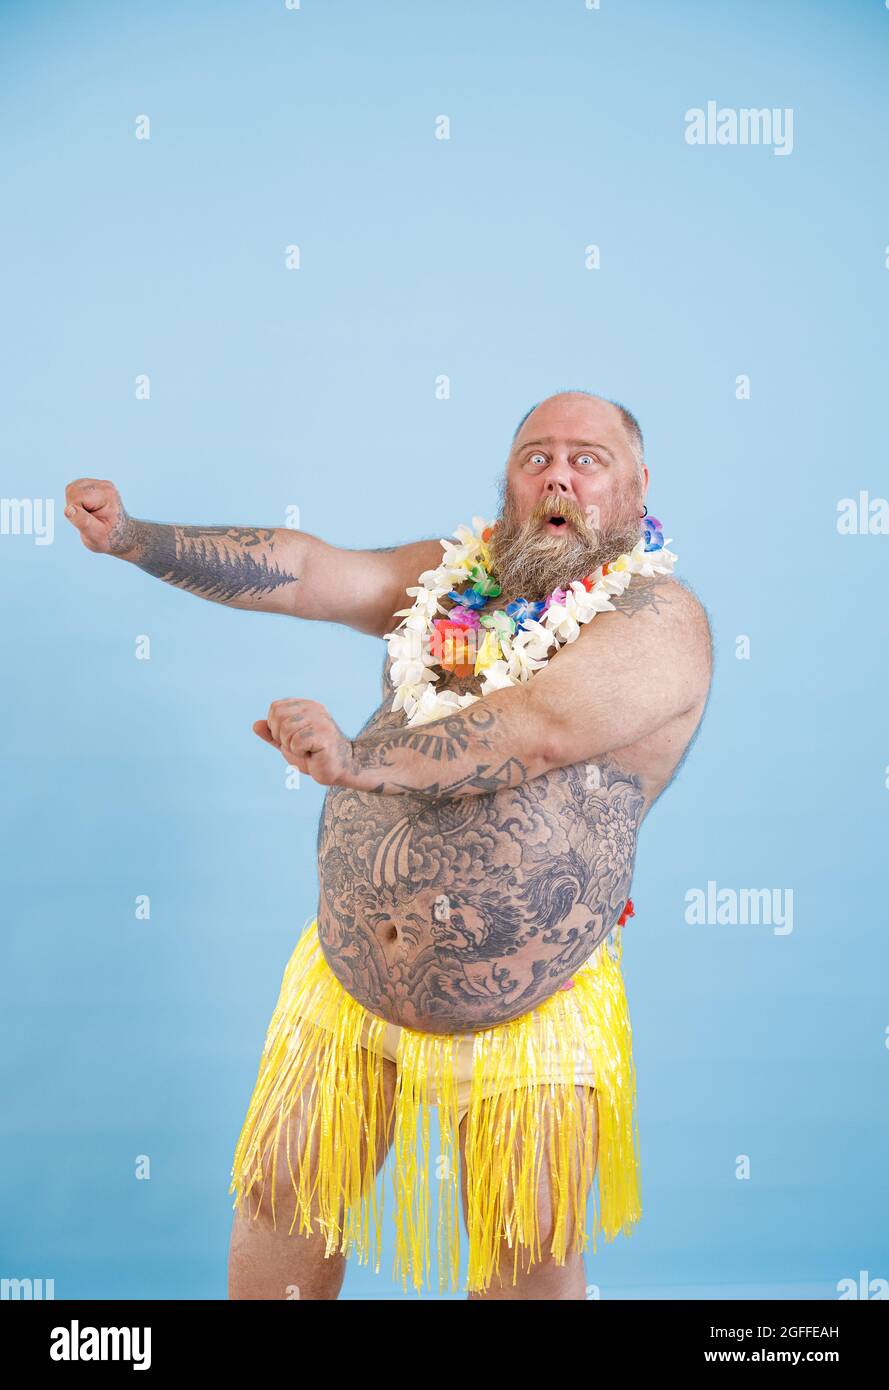 Emotional man with overweight in decorative grass skirt adances on light blue background Stock Photo